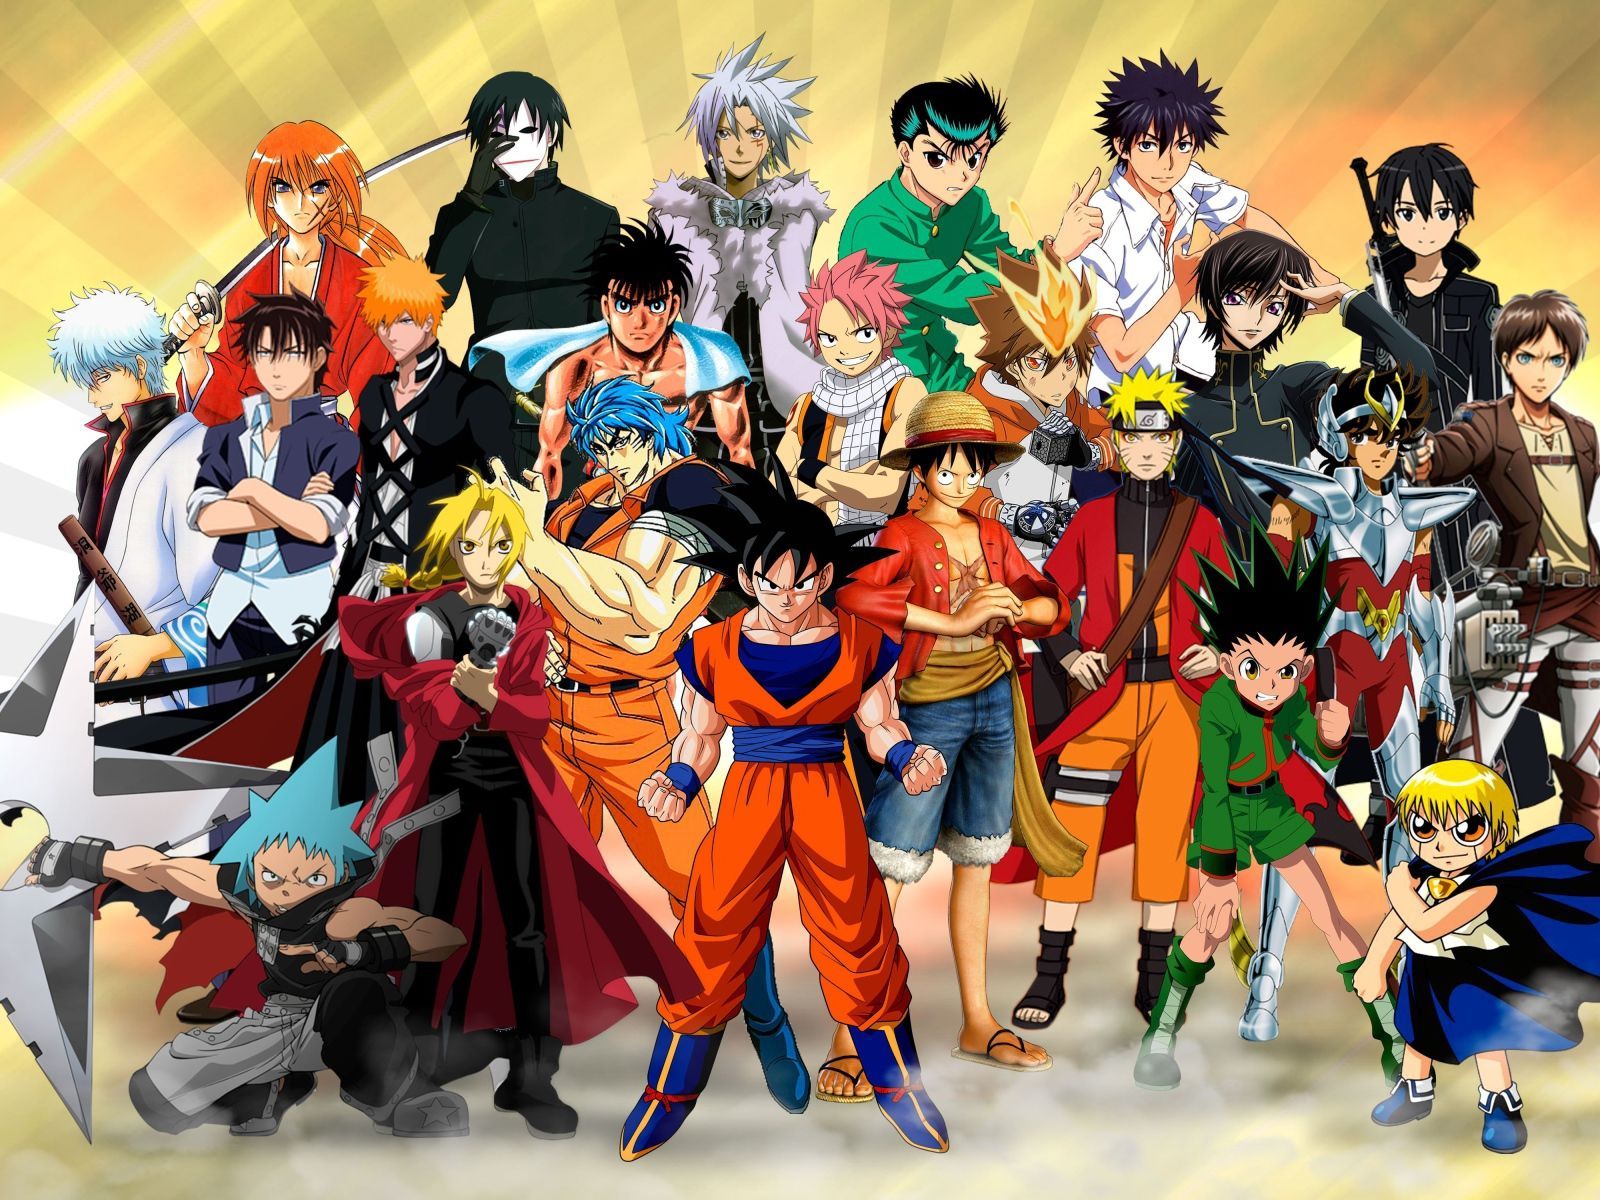 HD Anime Wallpaper Discover more Animated, Anime, Cartoon, Character,  However wallpapers. http…